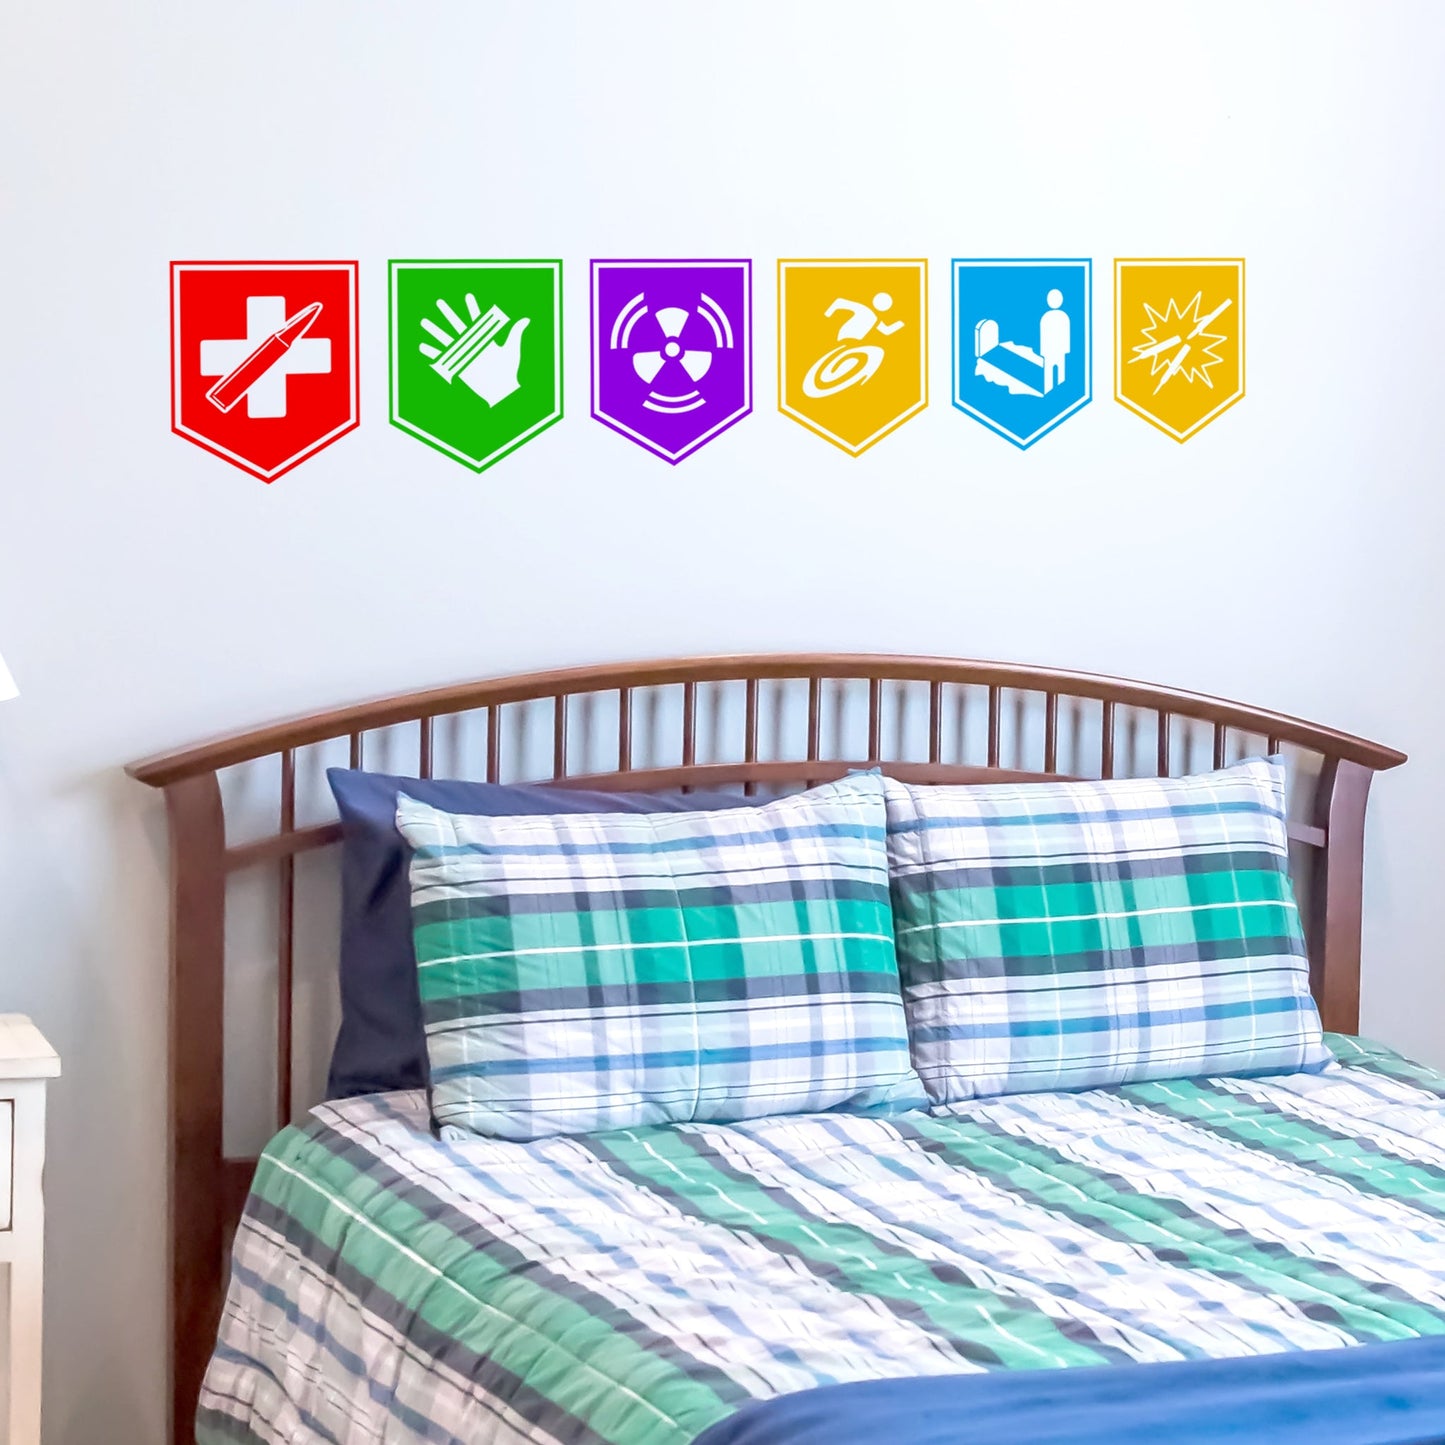 Call of duty gaming vinyl stickers for kids bedroom wall